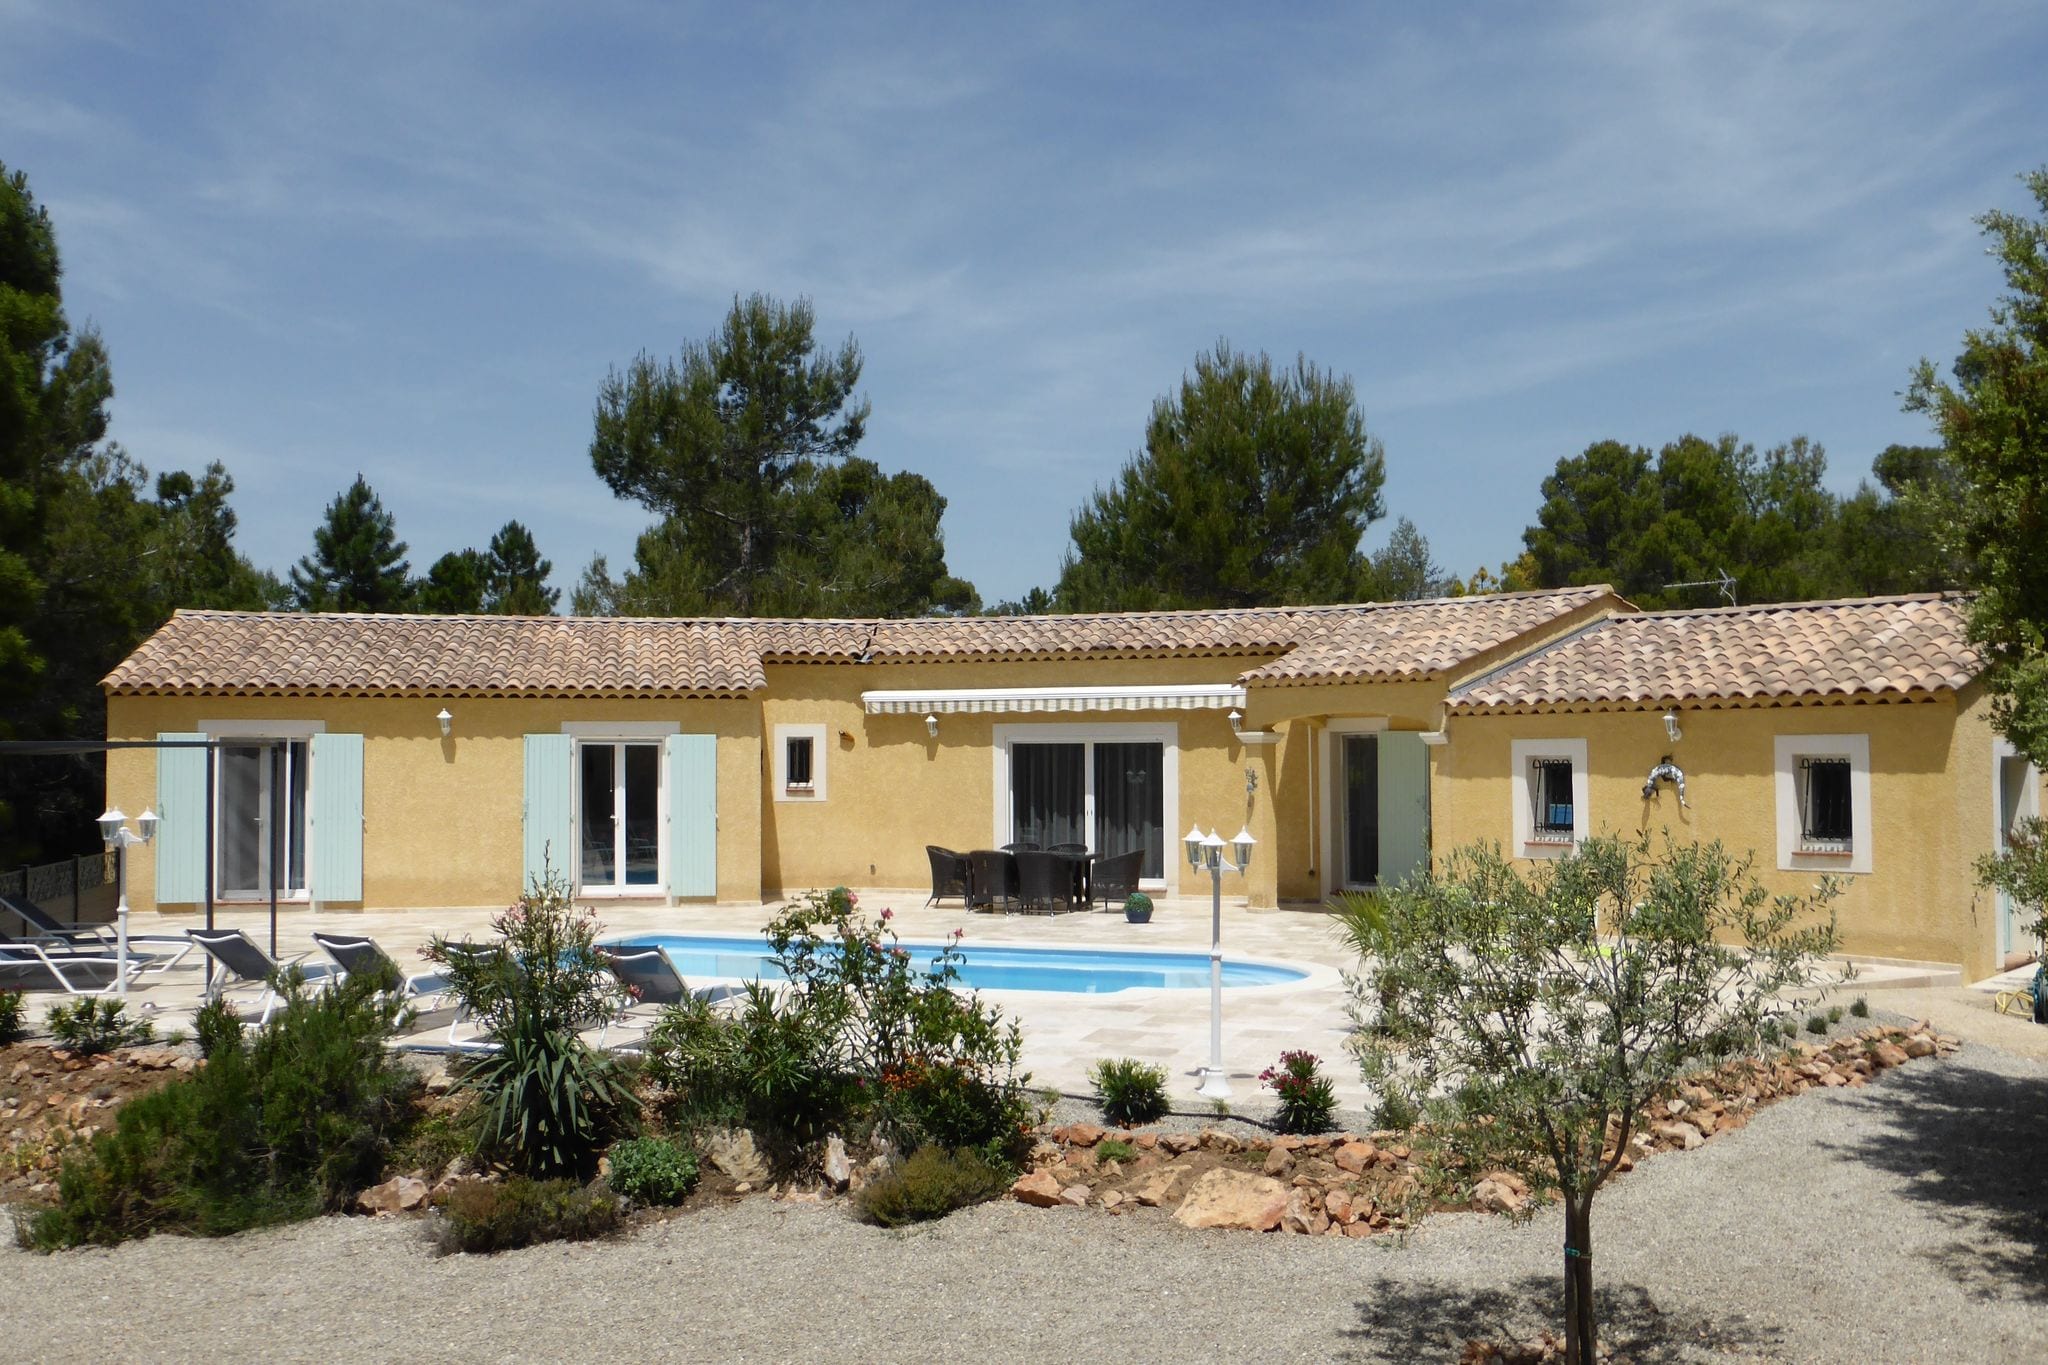 Detached spacious villa with private heated pool, near the Gorges du Verdon